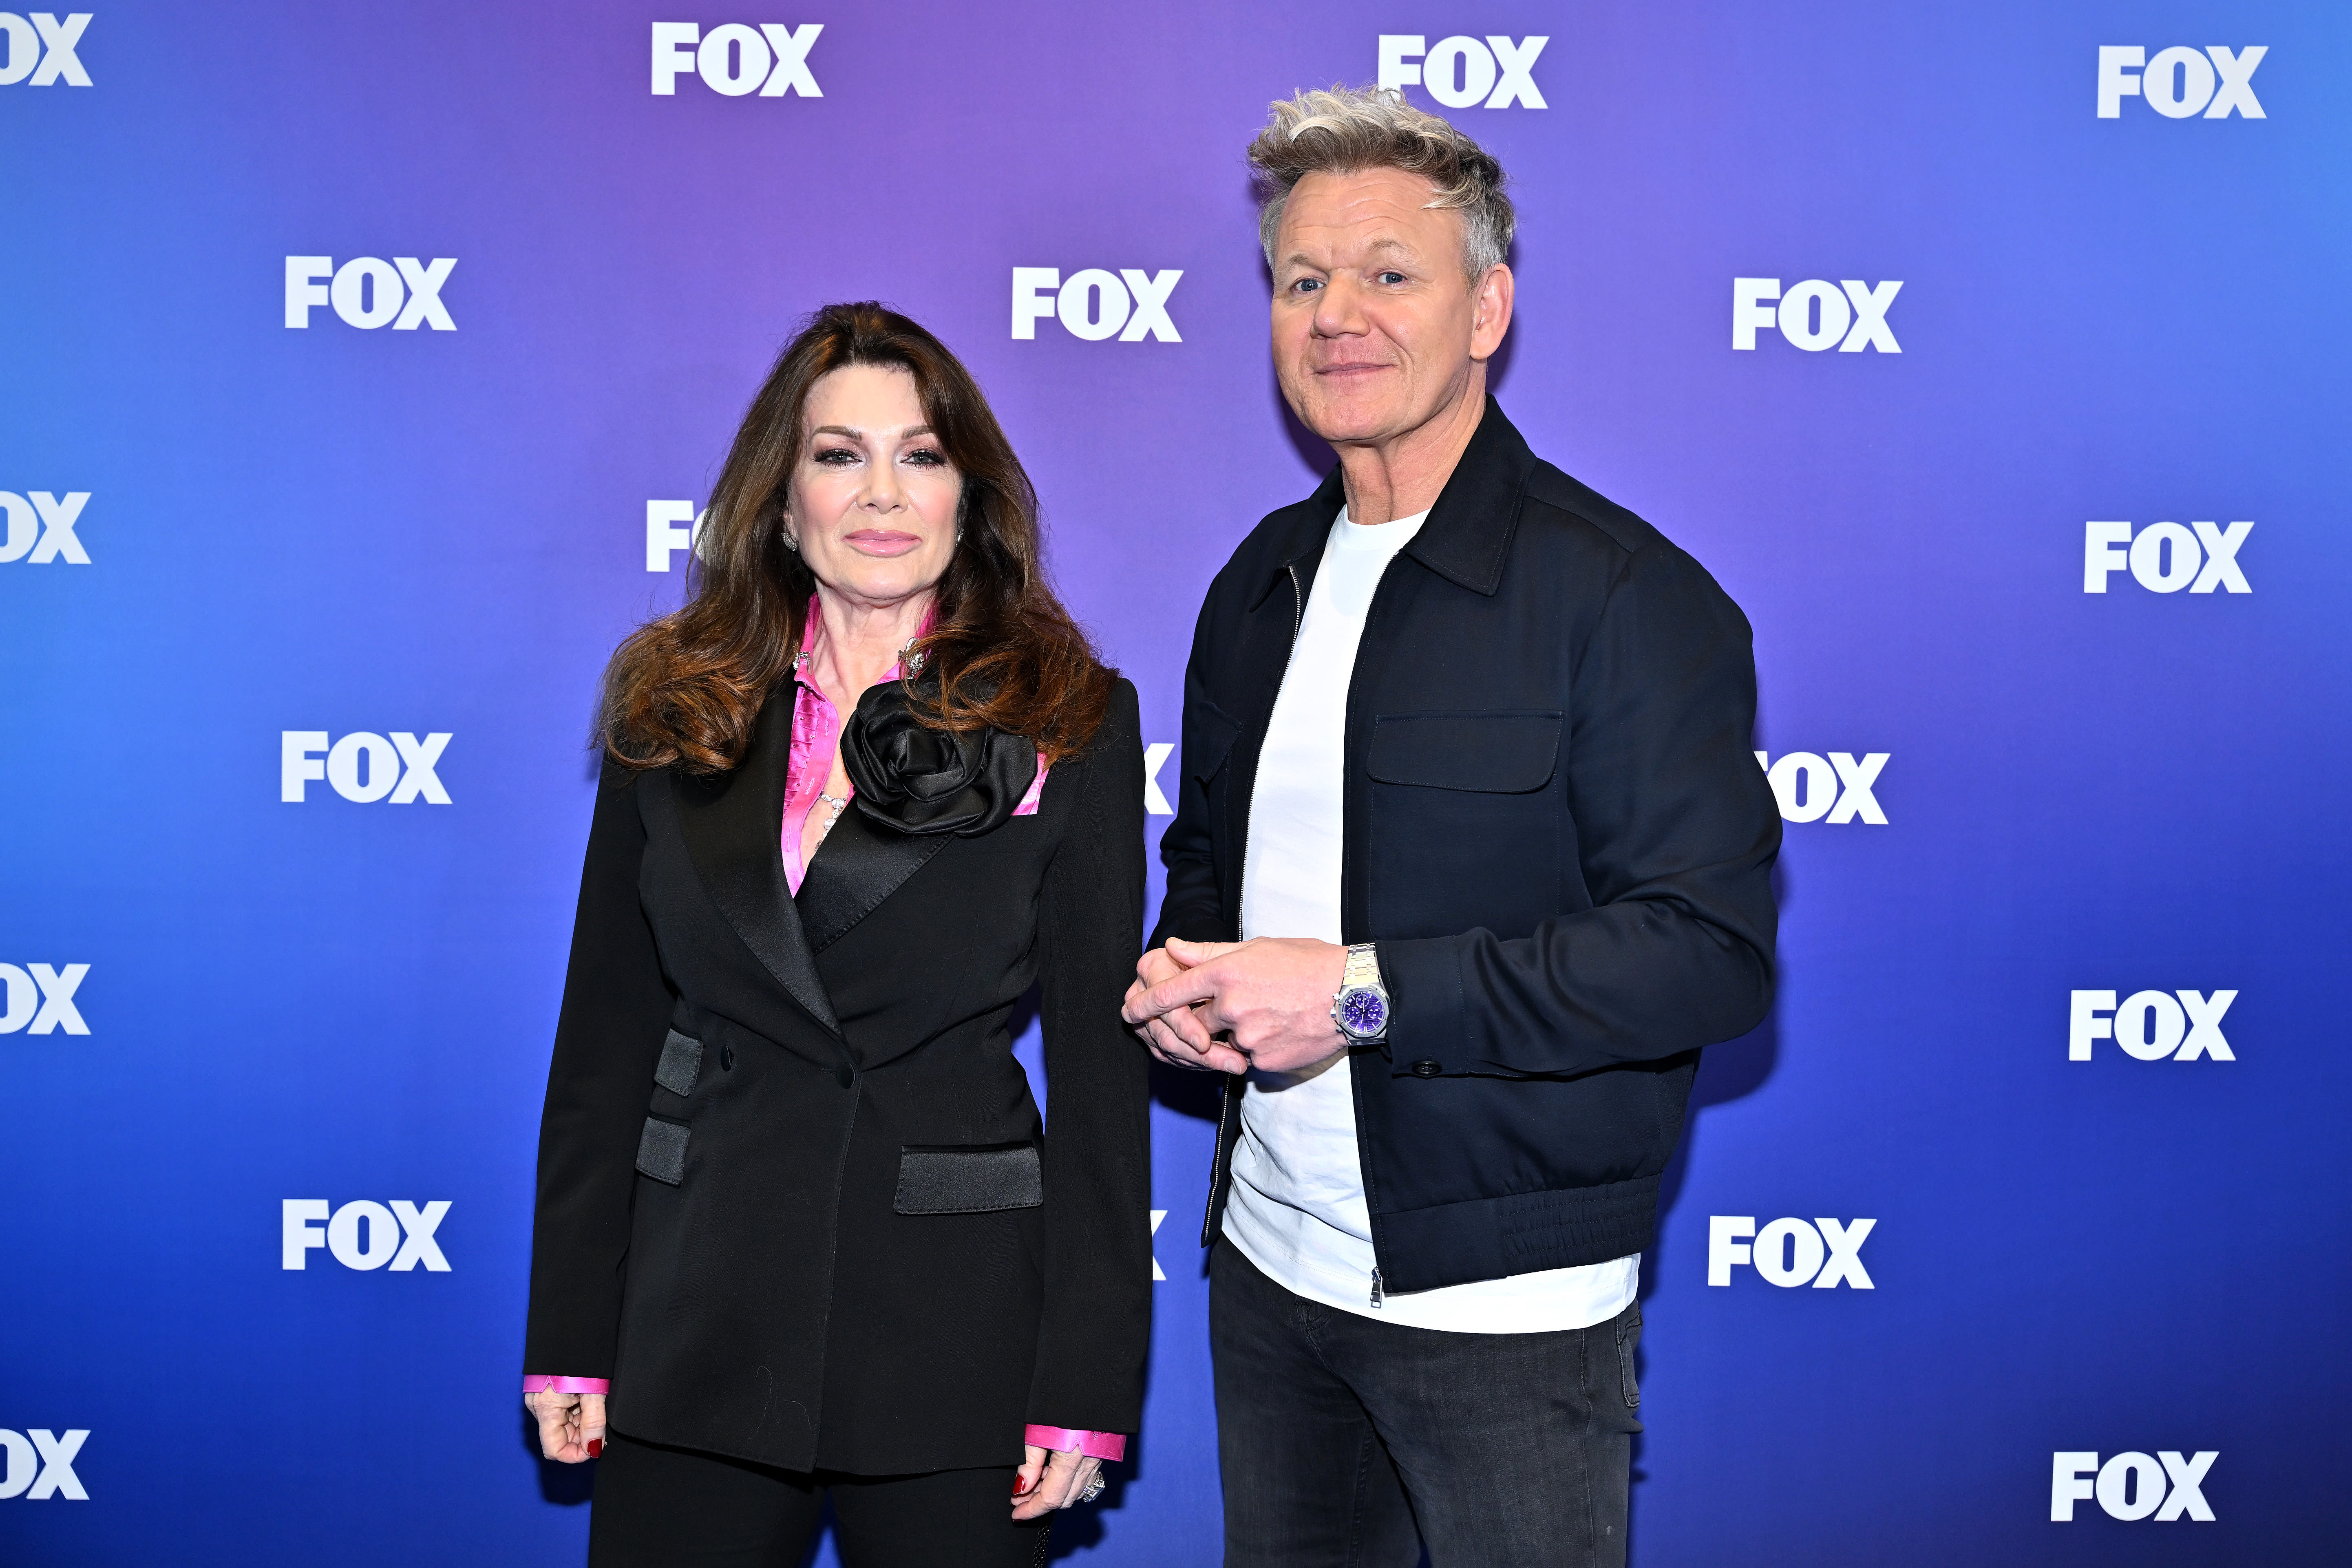 Fox Upfront: Here’s What Happened At The Hammerstein Ballroom